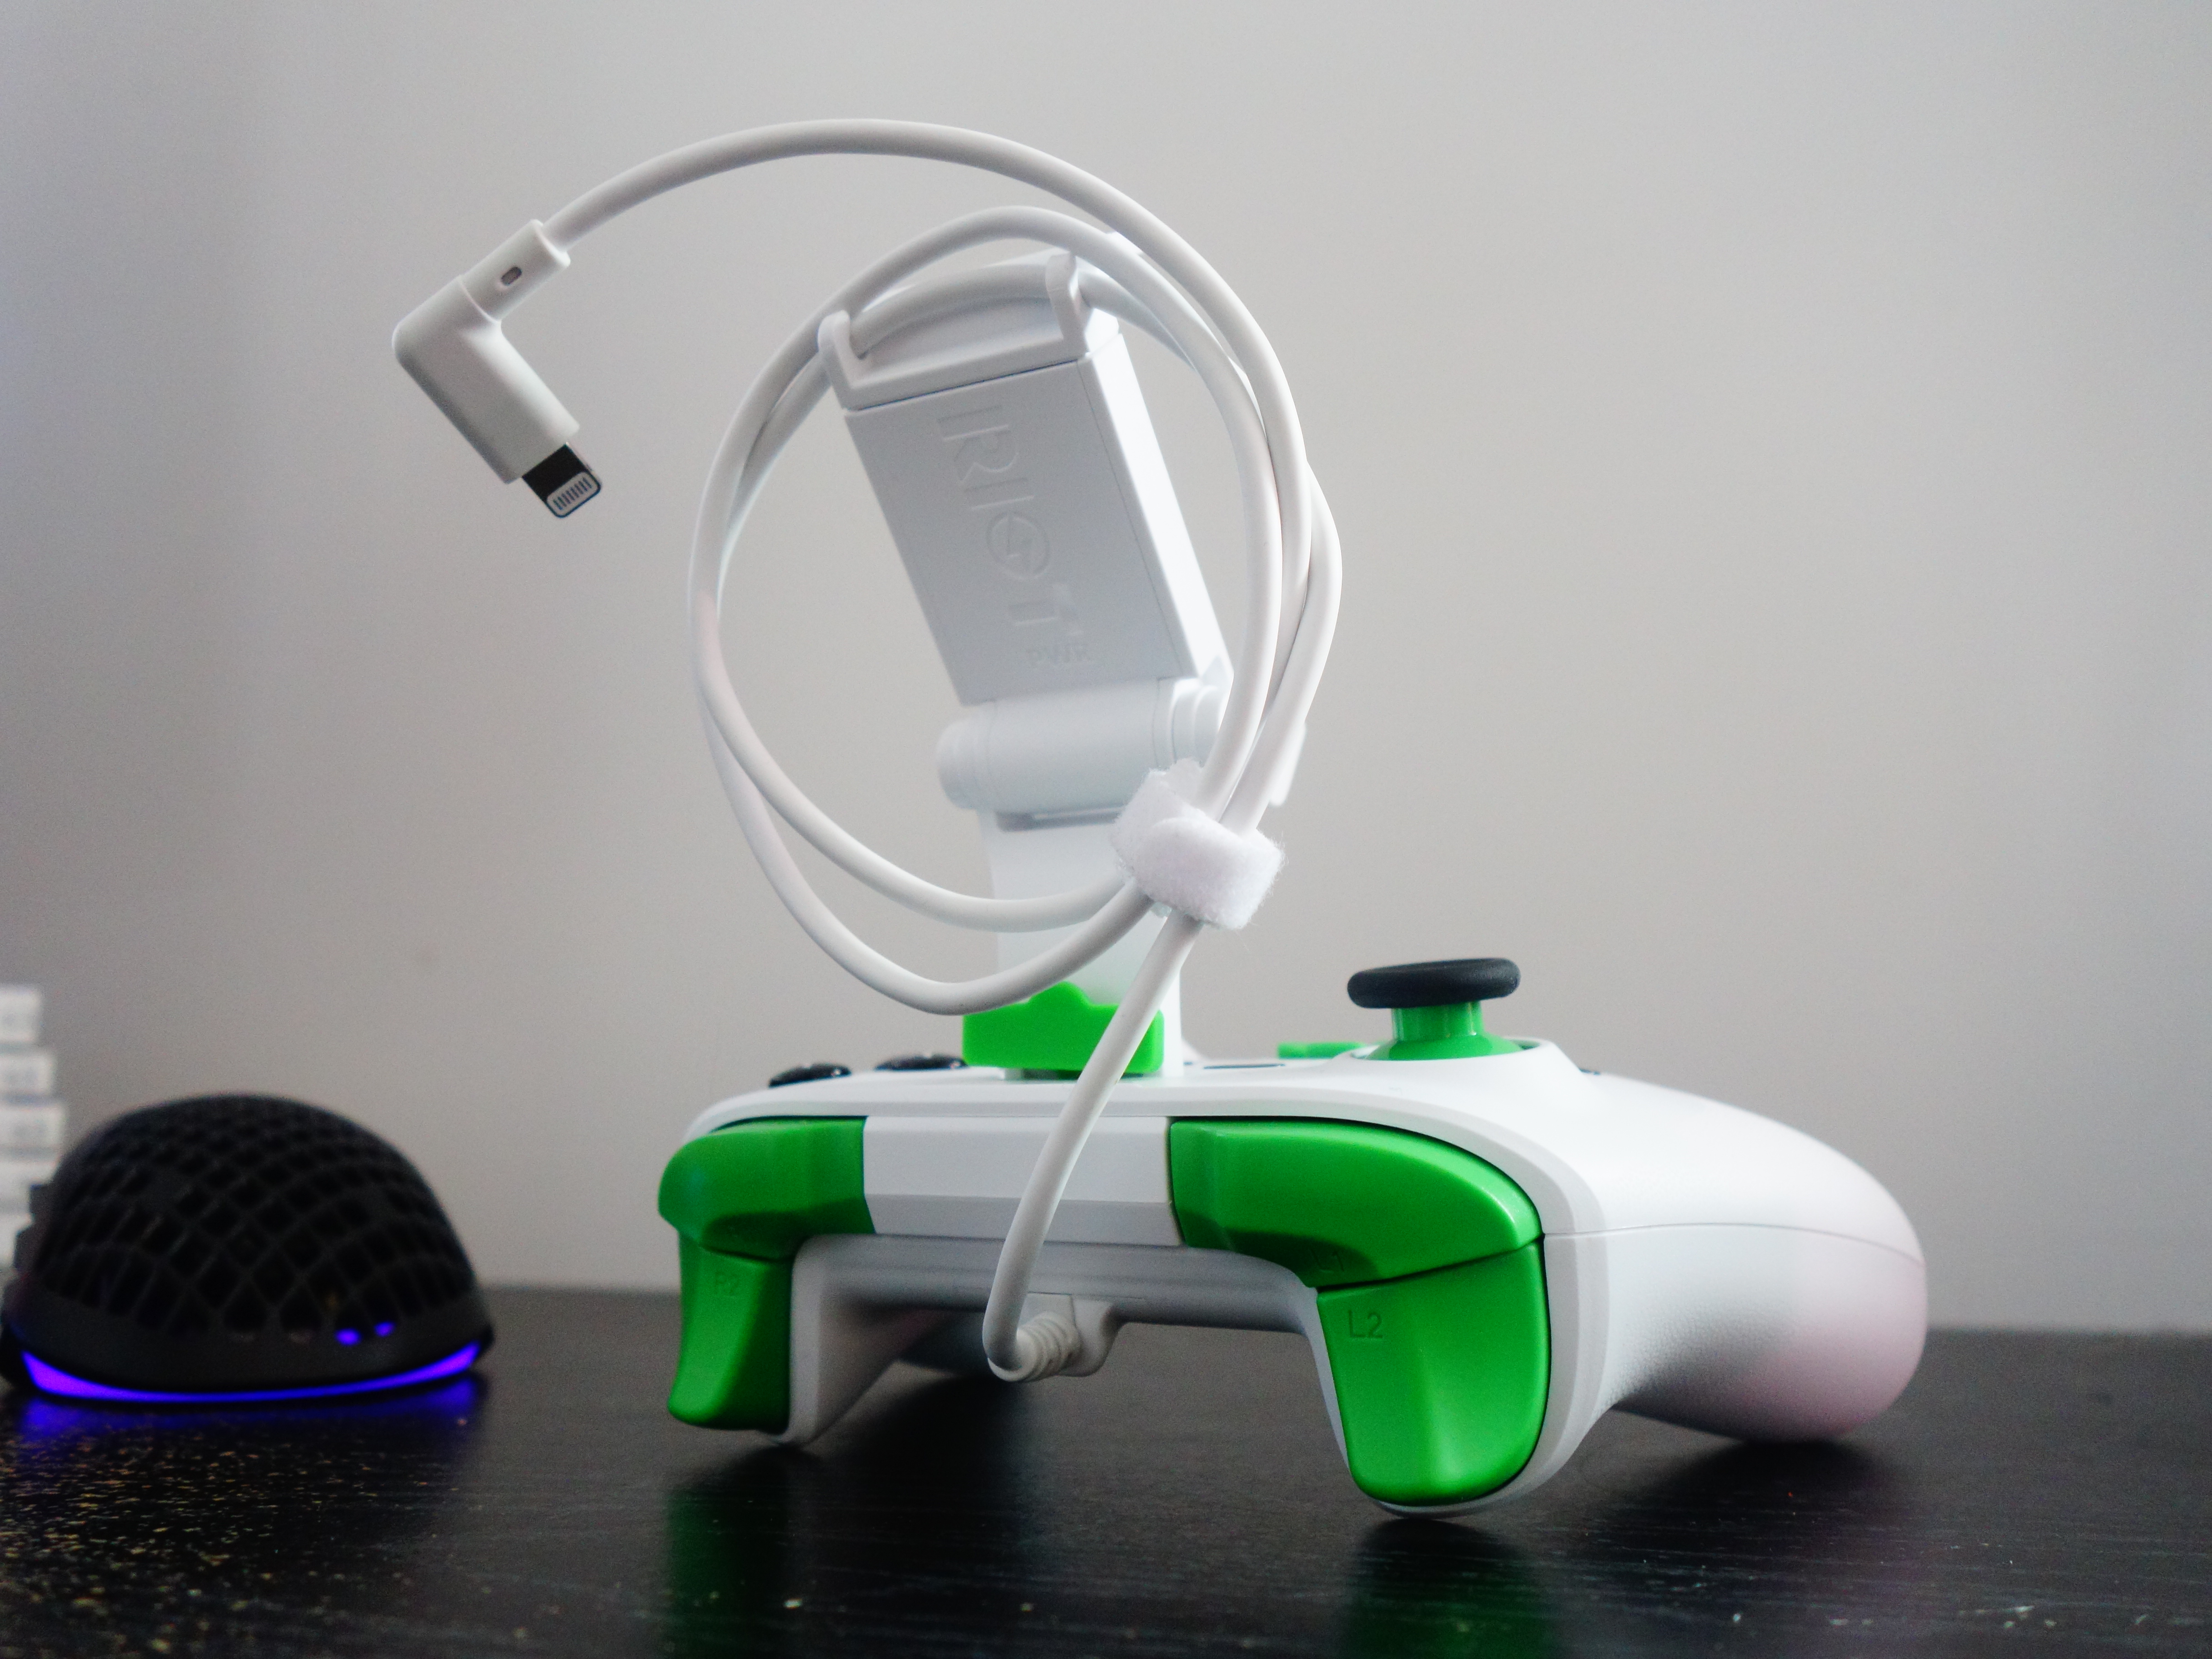 RiotPWR Xbox Cloud Gaming Controller for iOS review: Wires for the win